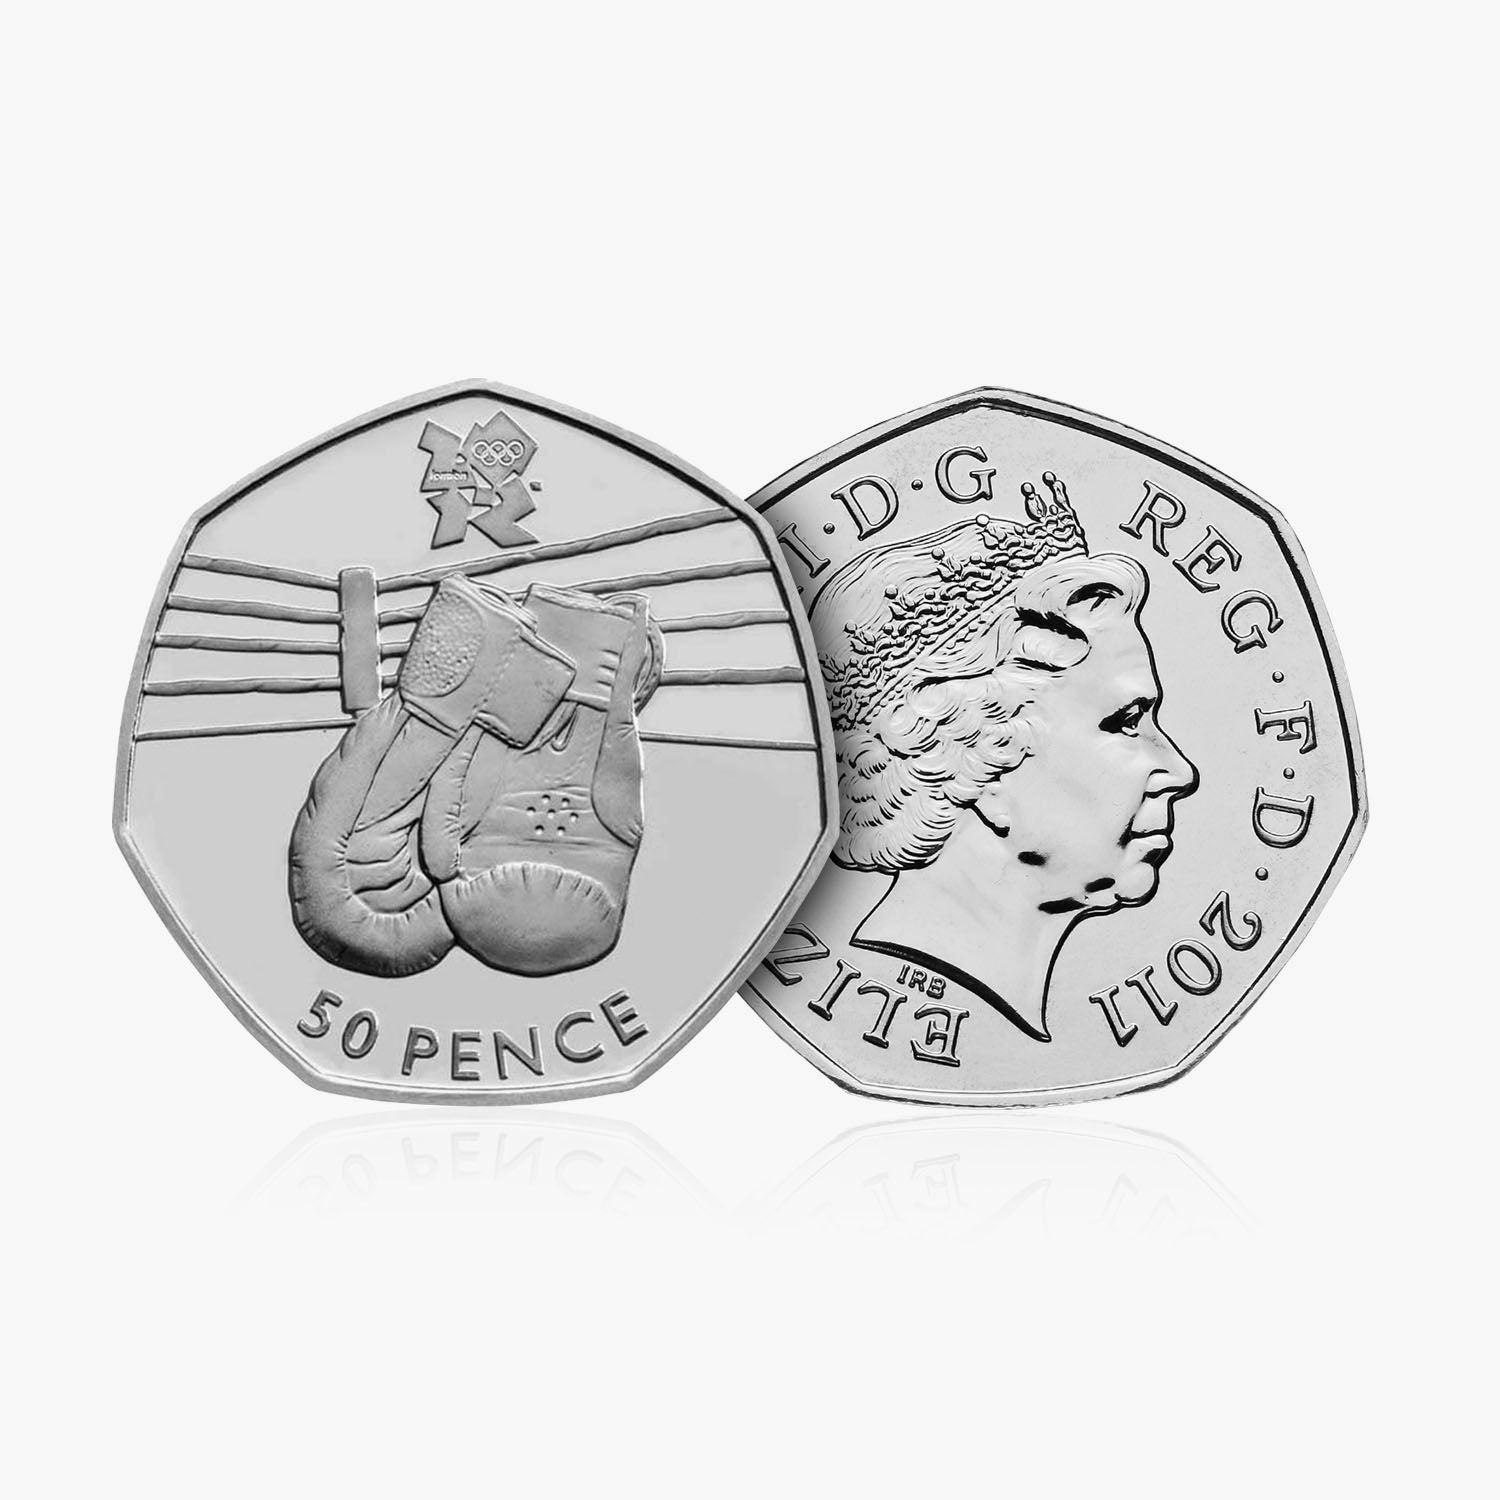 2011 Circulated Olympics - Boxing 50p Coin